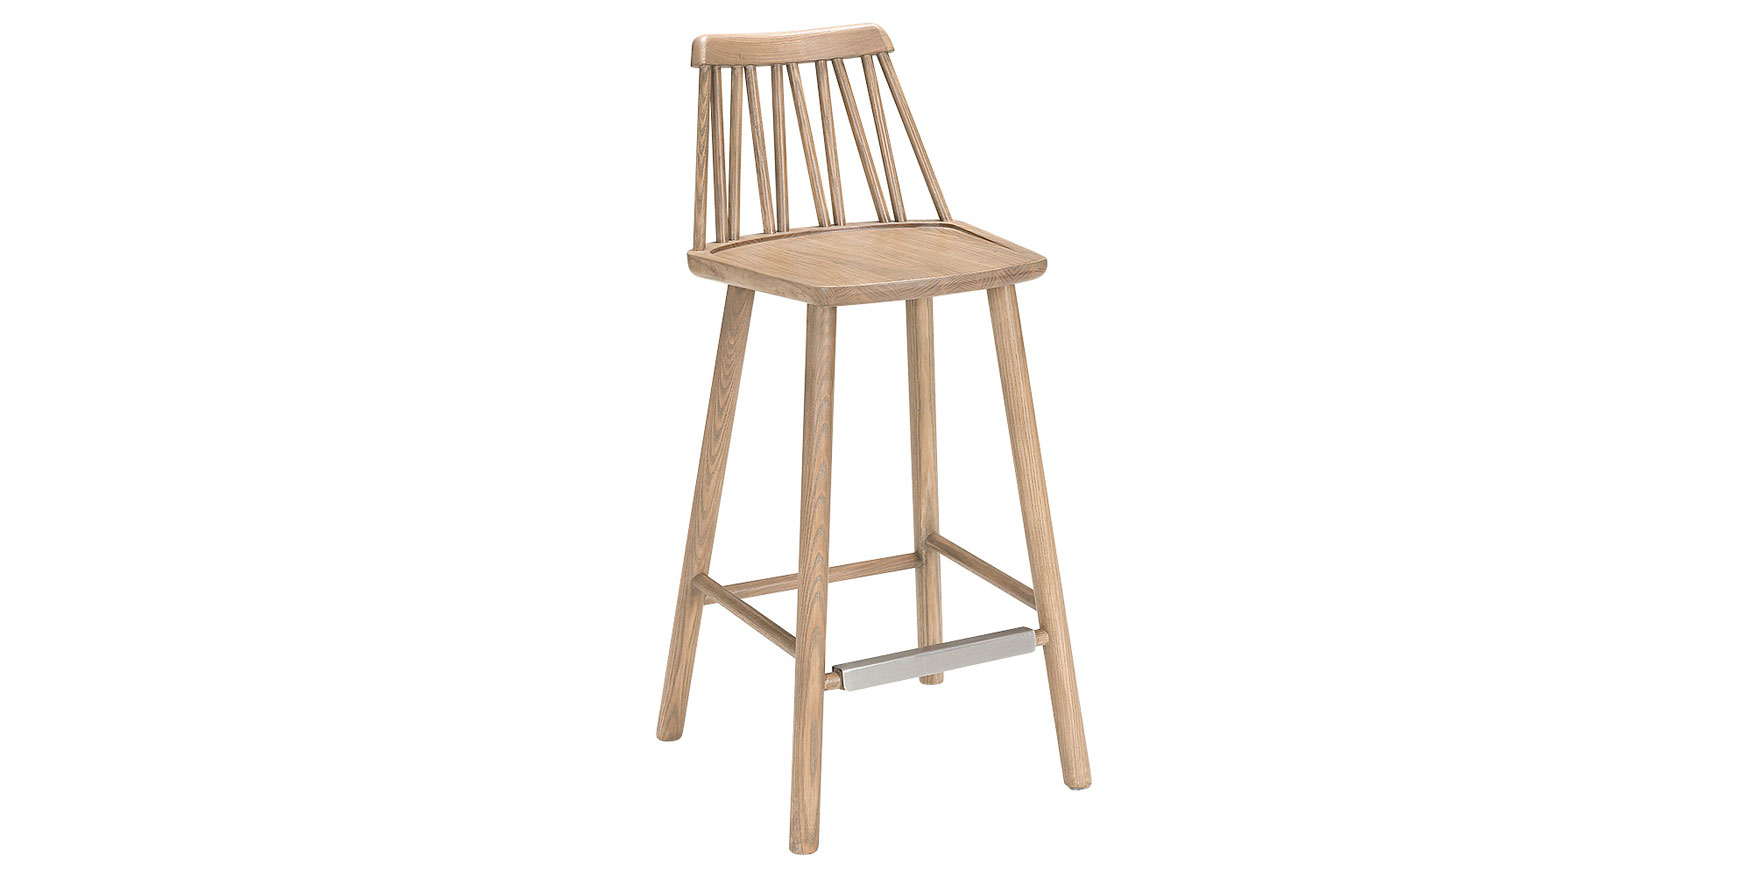 bentwood dining chair
